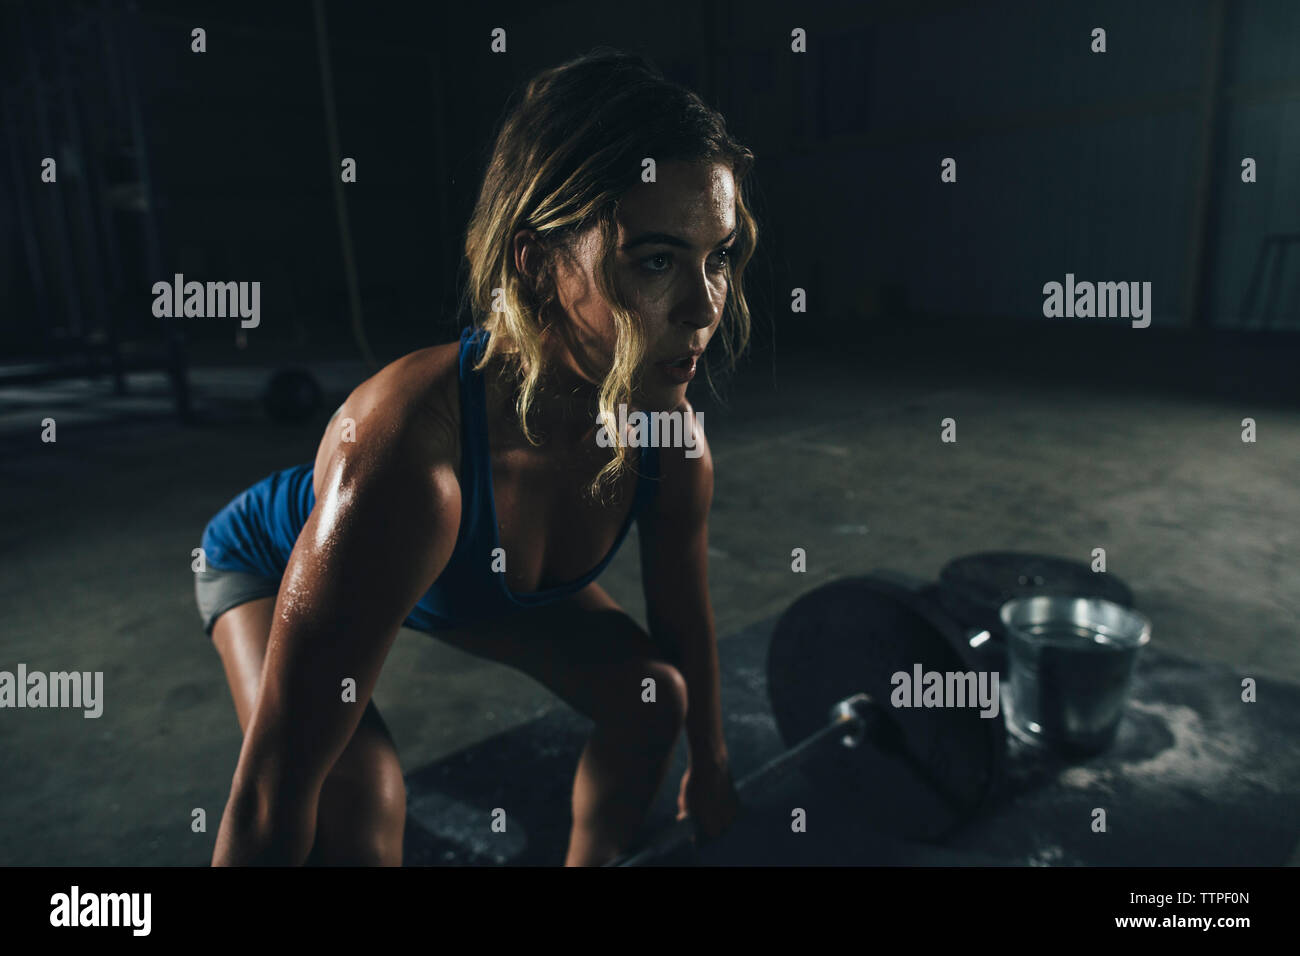 Confident female athlete lifting barbell in gym Stock Photo